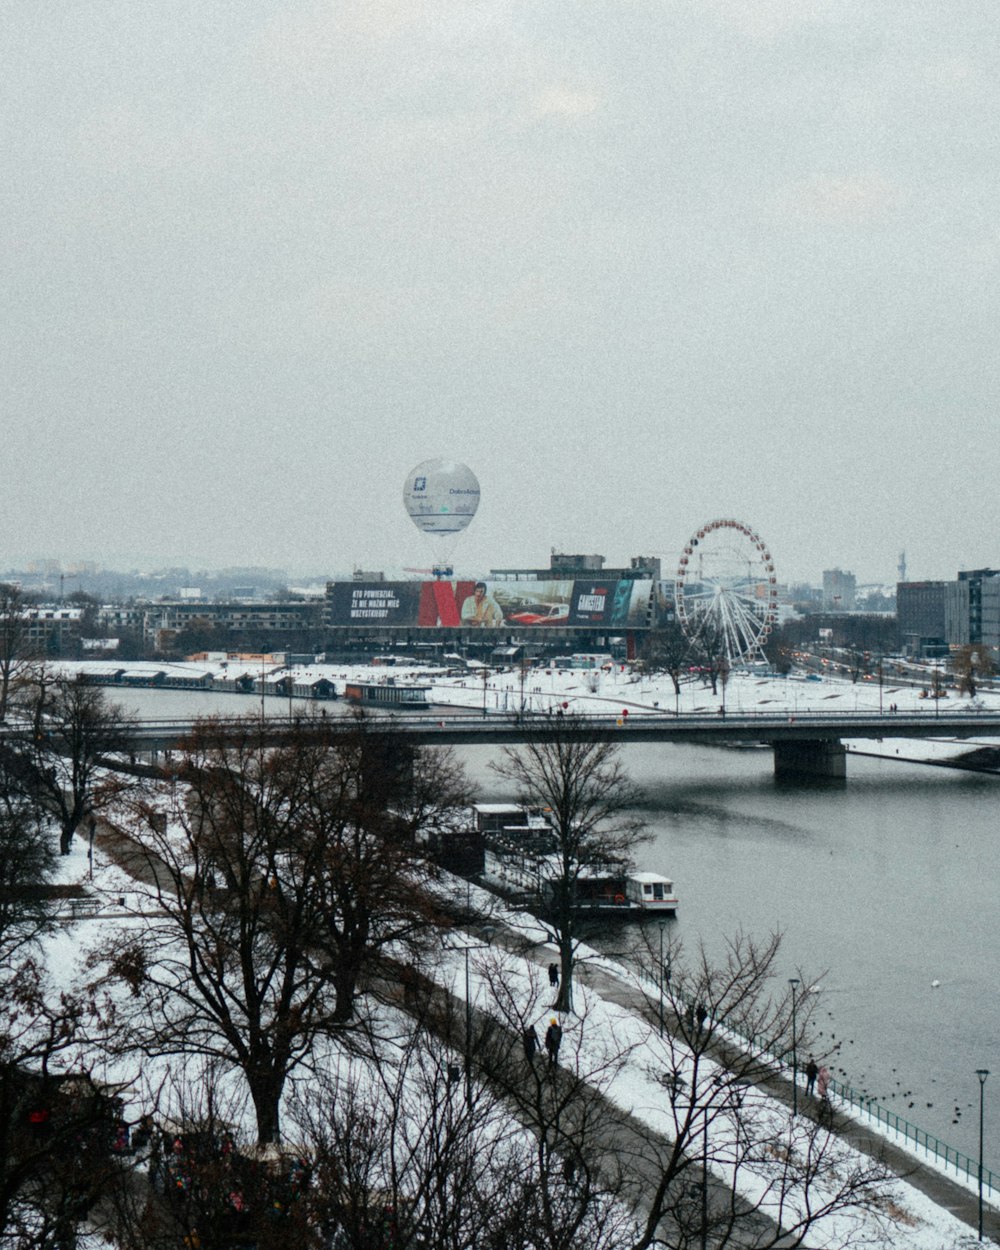 a view of a river and a bridge with a ferris wheel in the distance